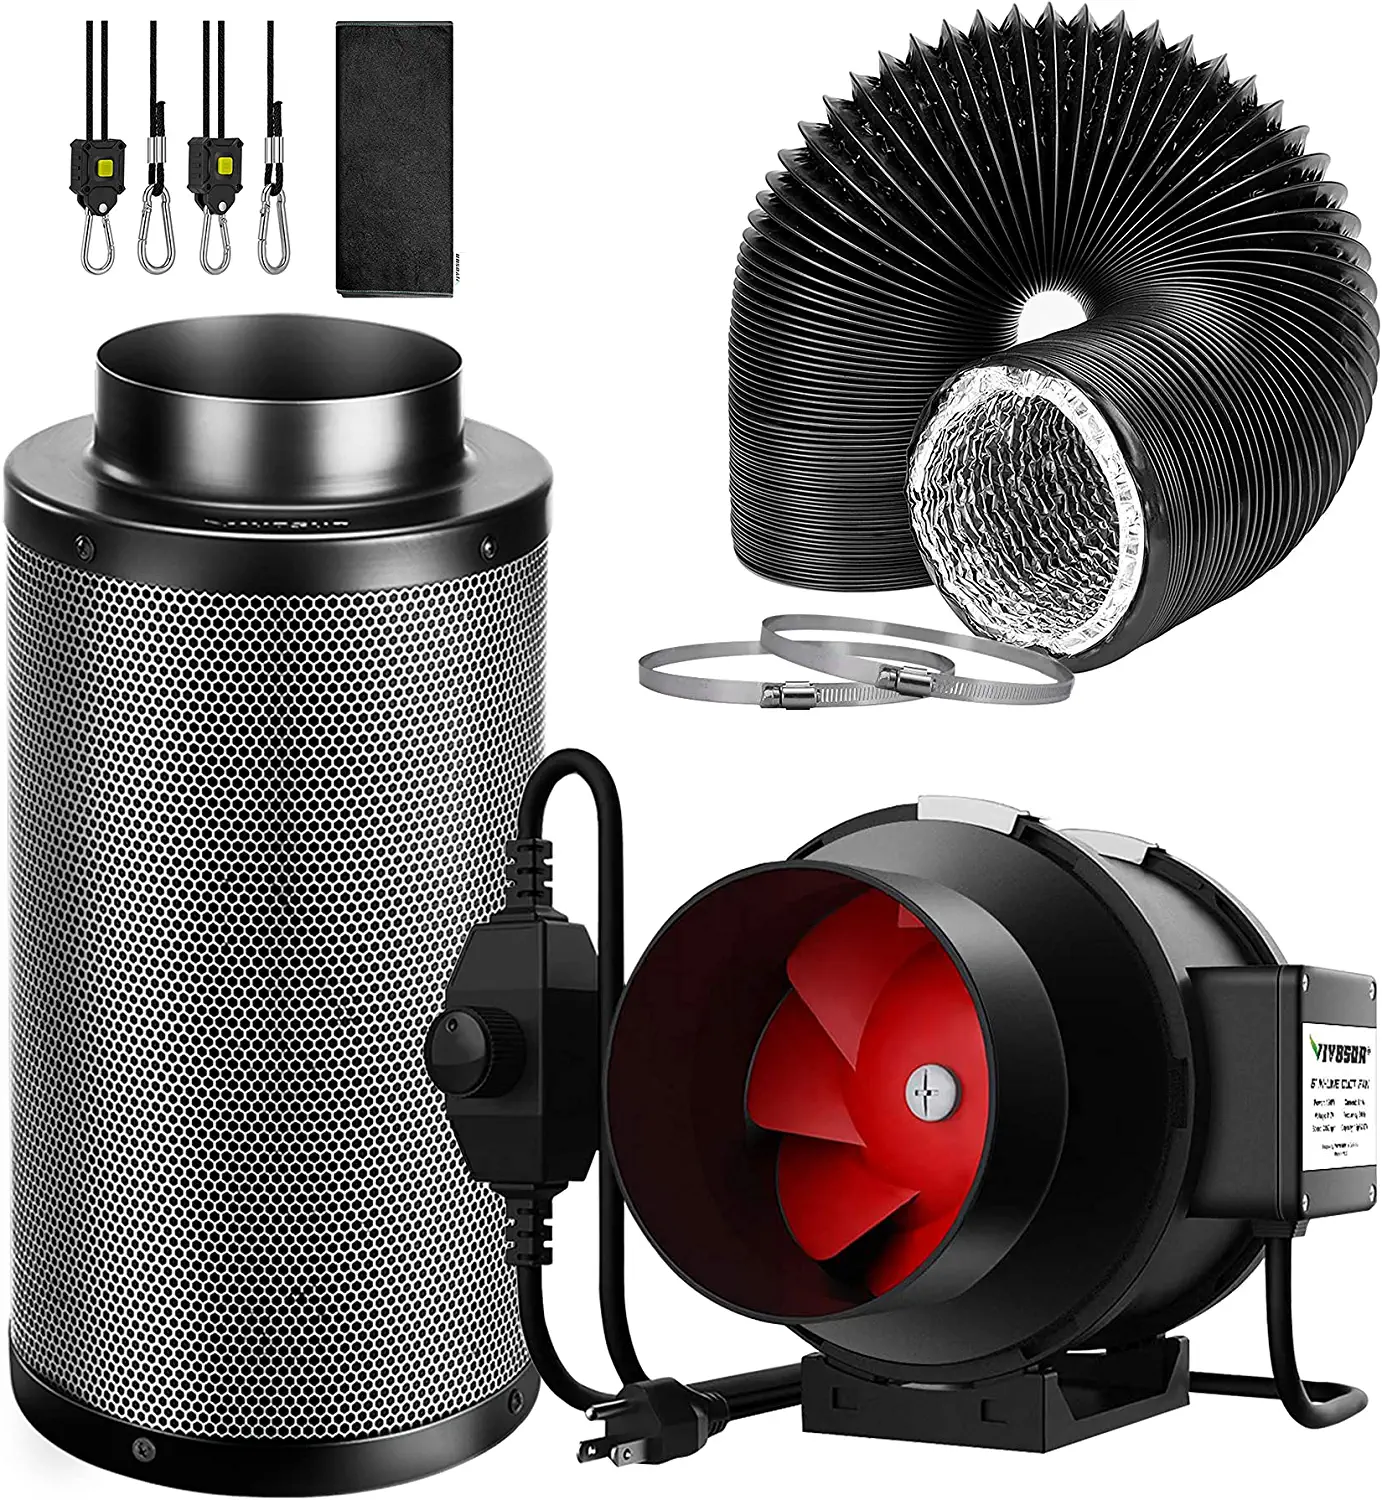 VIVOSUN 6-Inch 390 CFM Inline Duct Fan Kit with Black Carbon Filter and Black Ducting